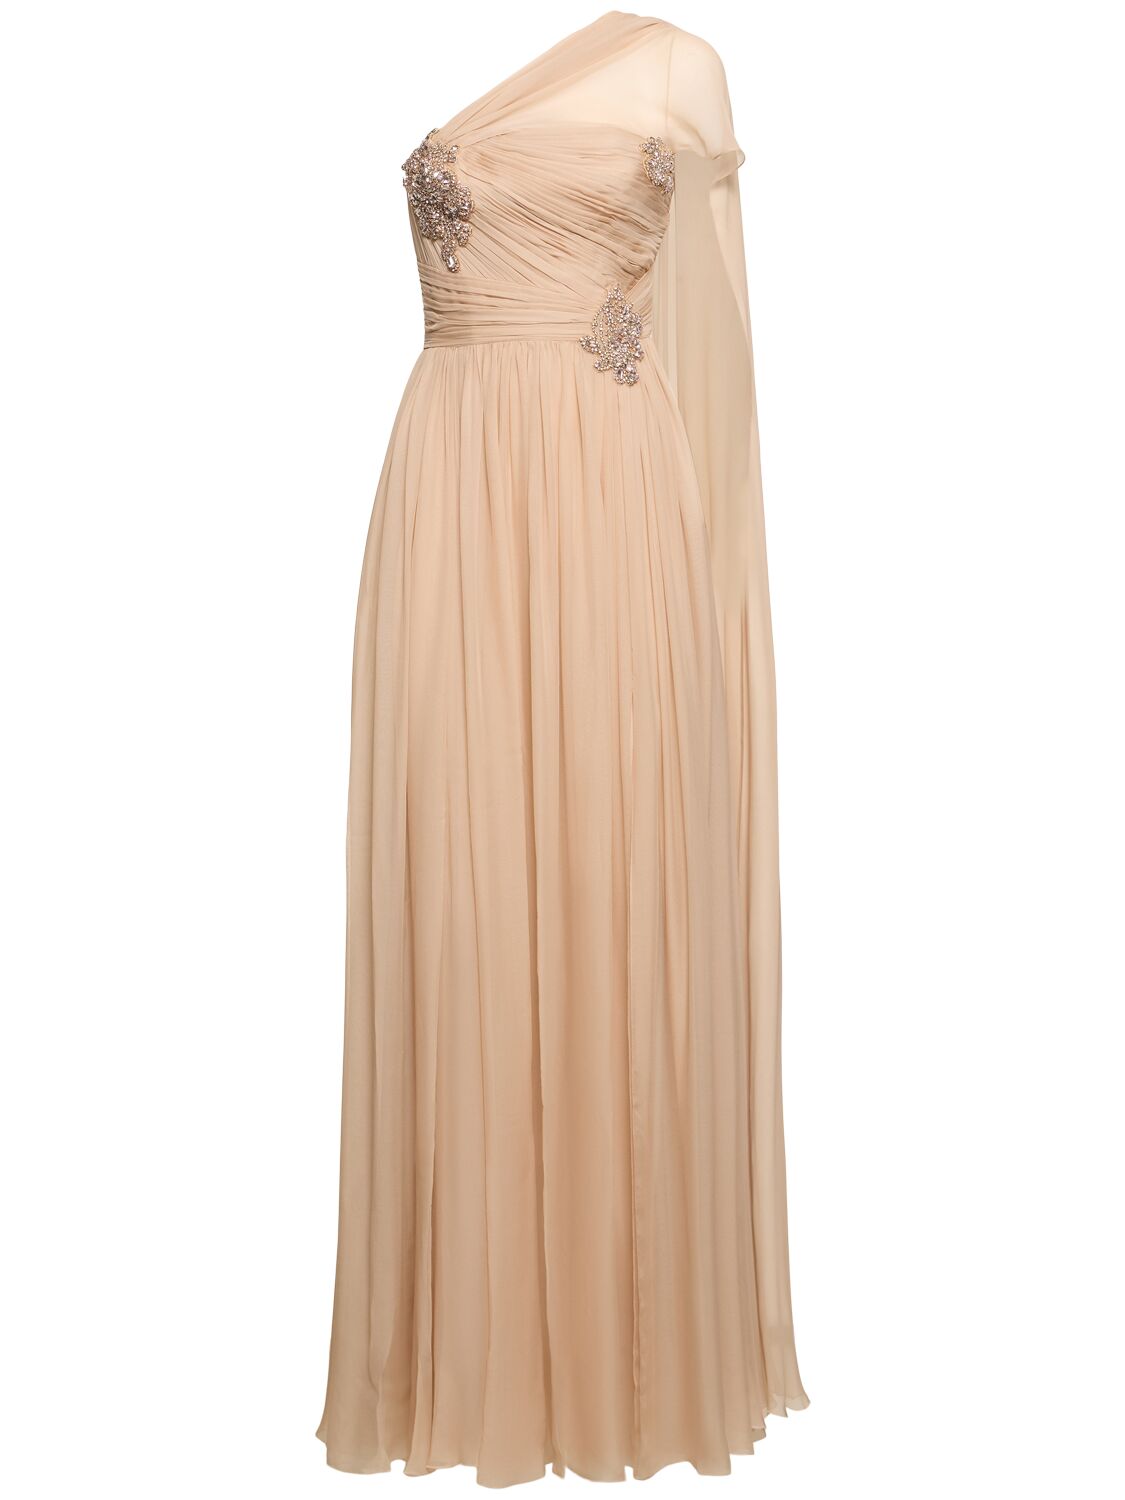 Zuhair Murad Embroidered Chiffon Long Dress In Nude